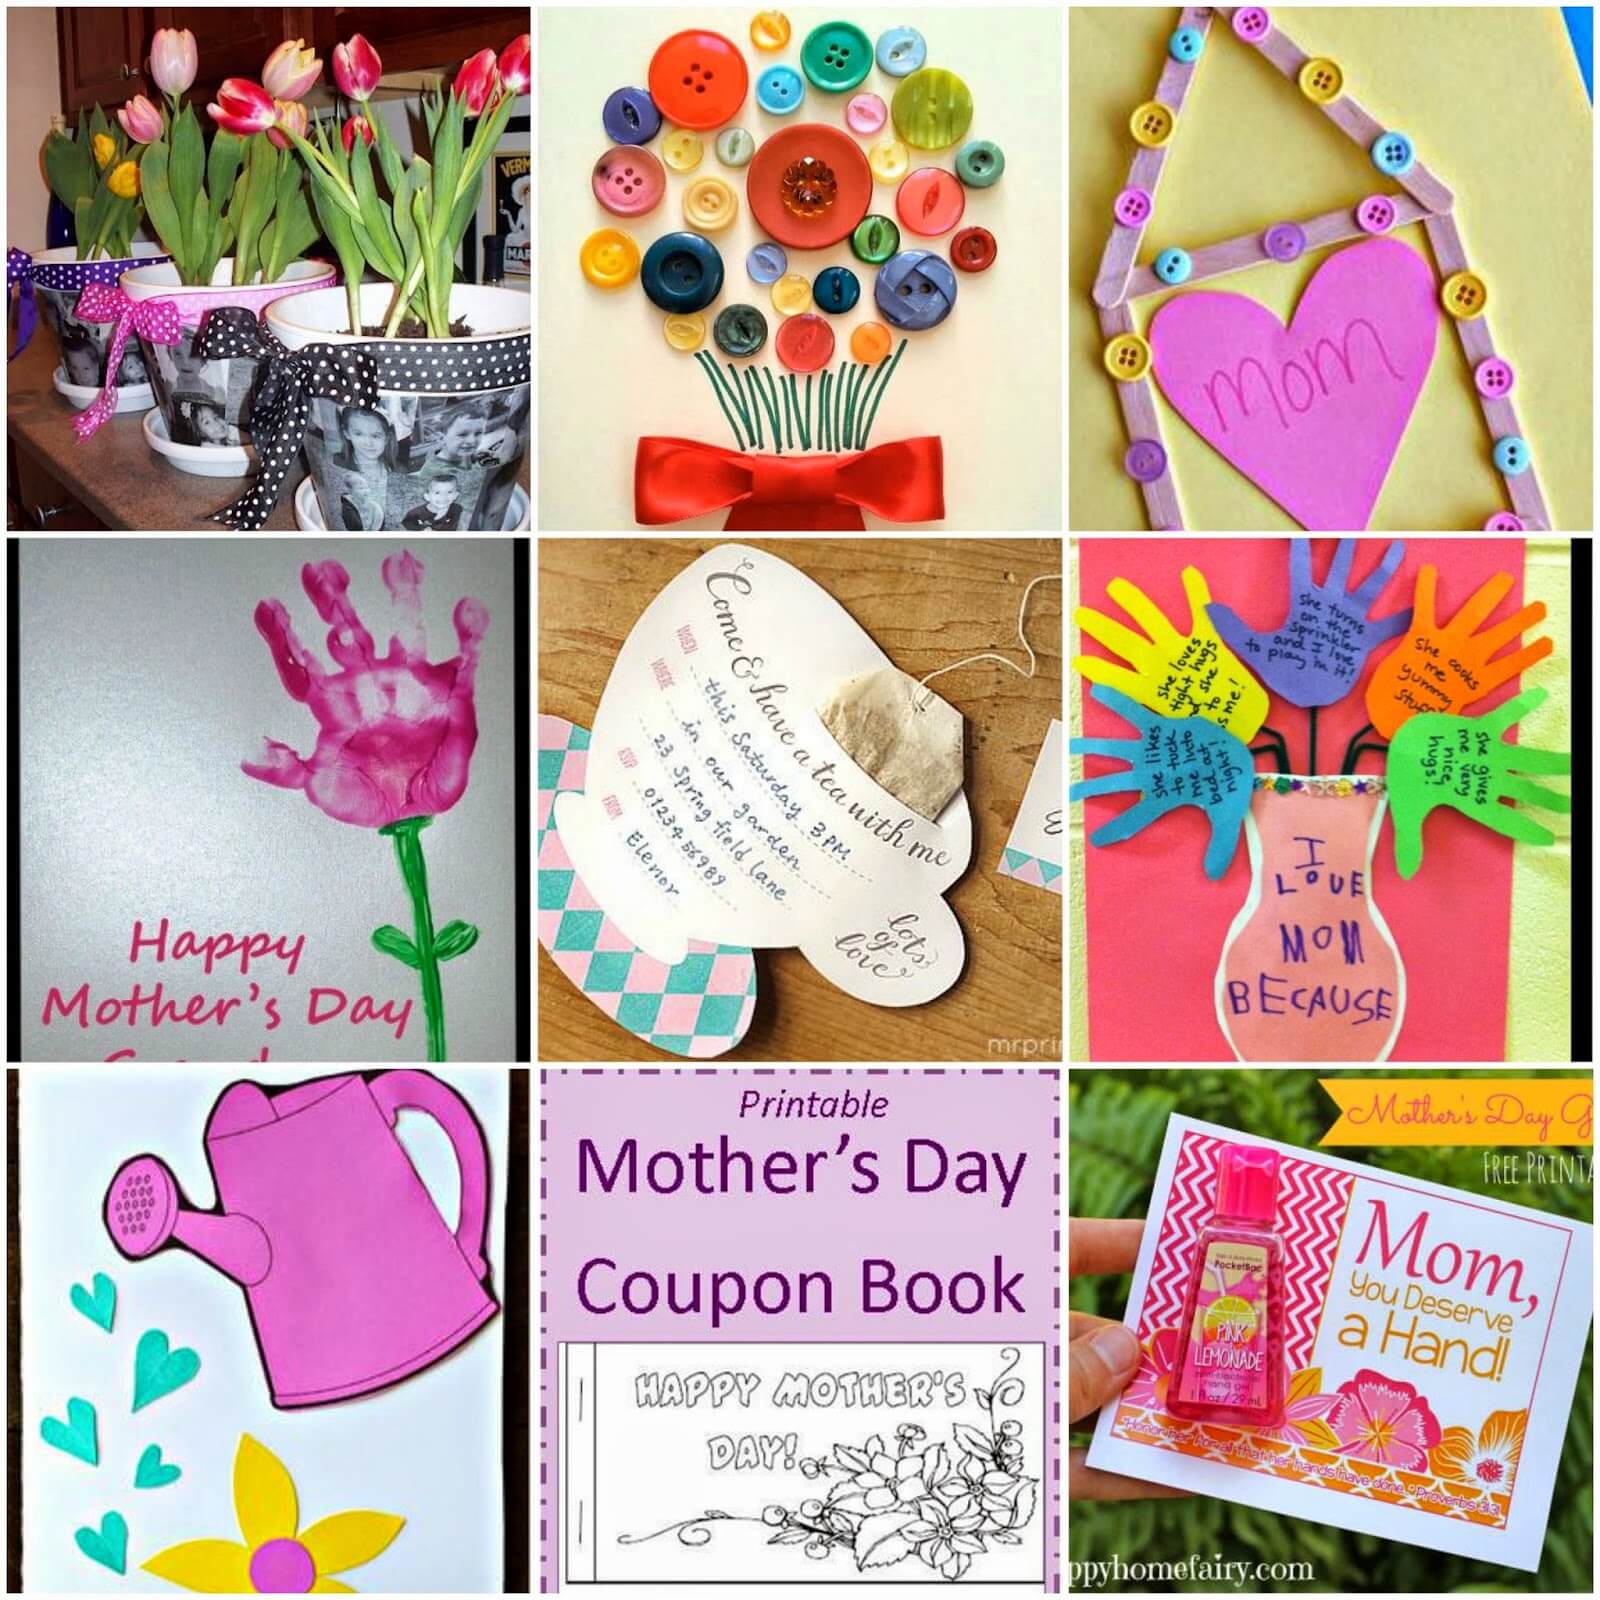 18 Mother s Day Crafts Mother 2 Mother Blog